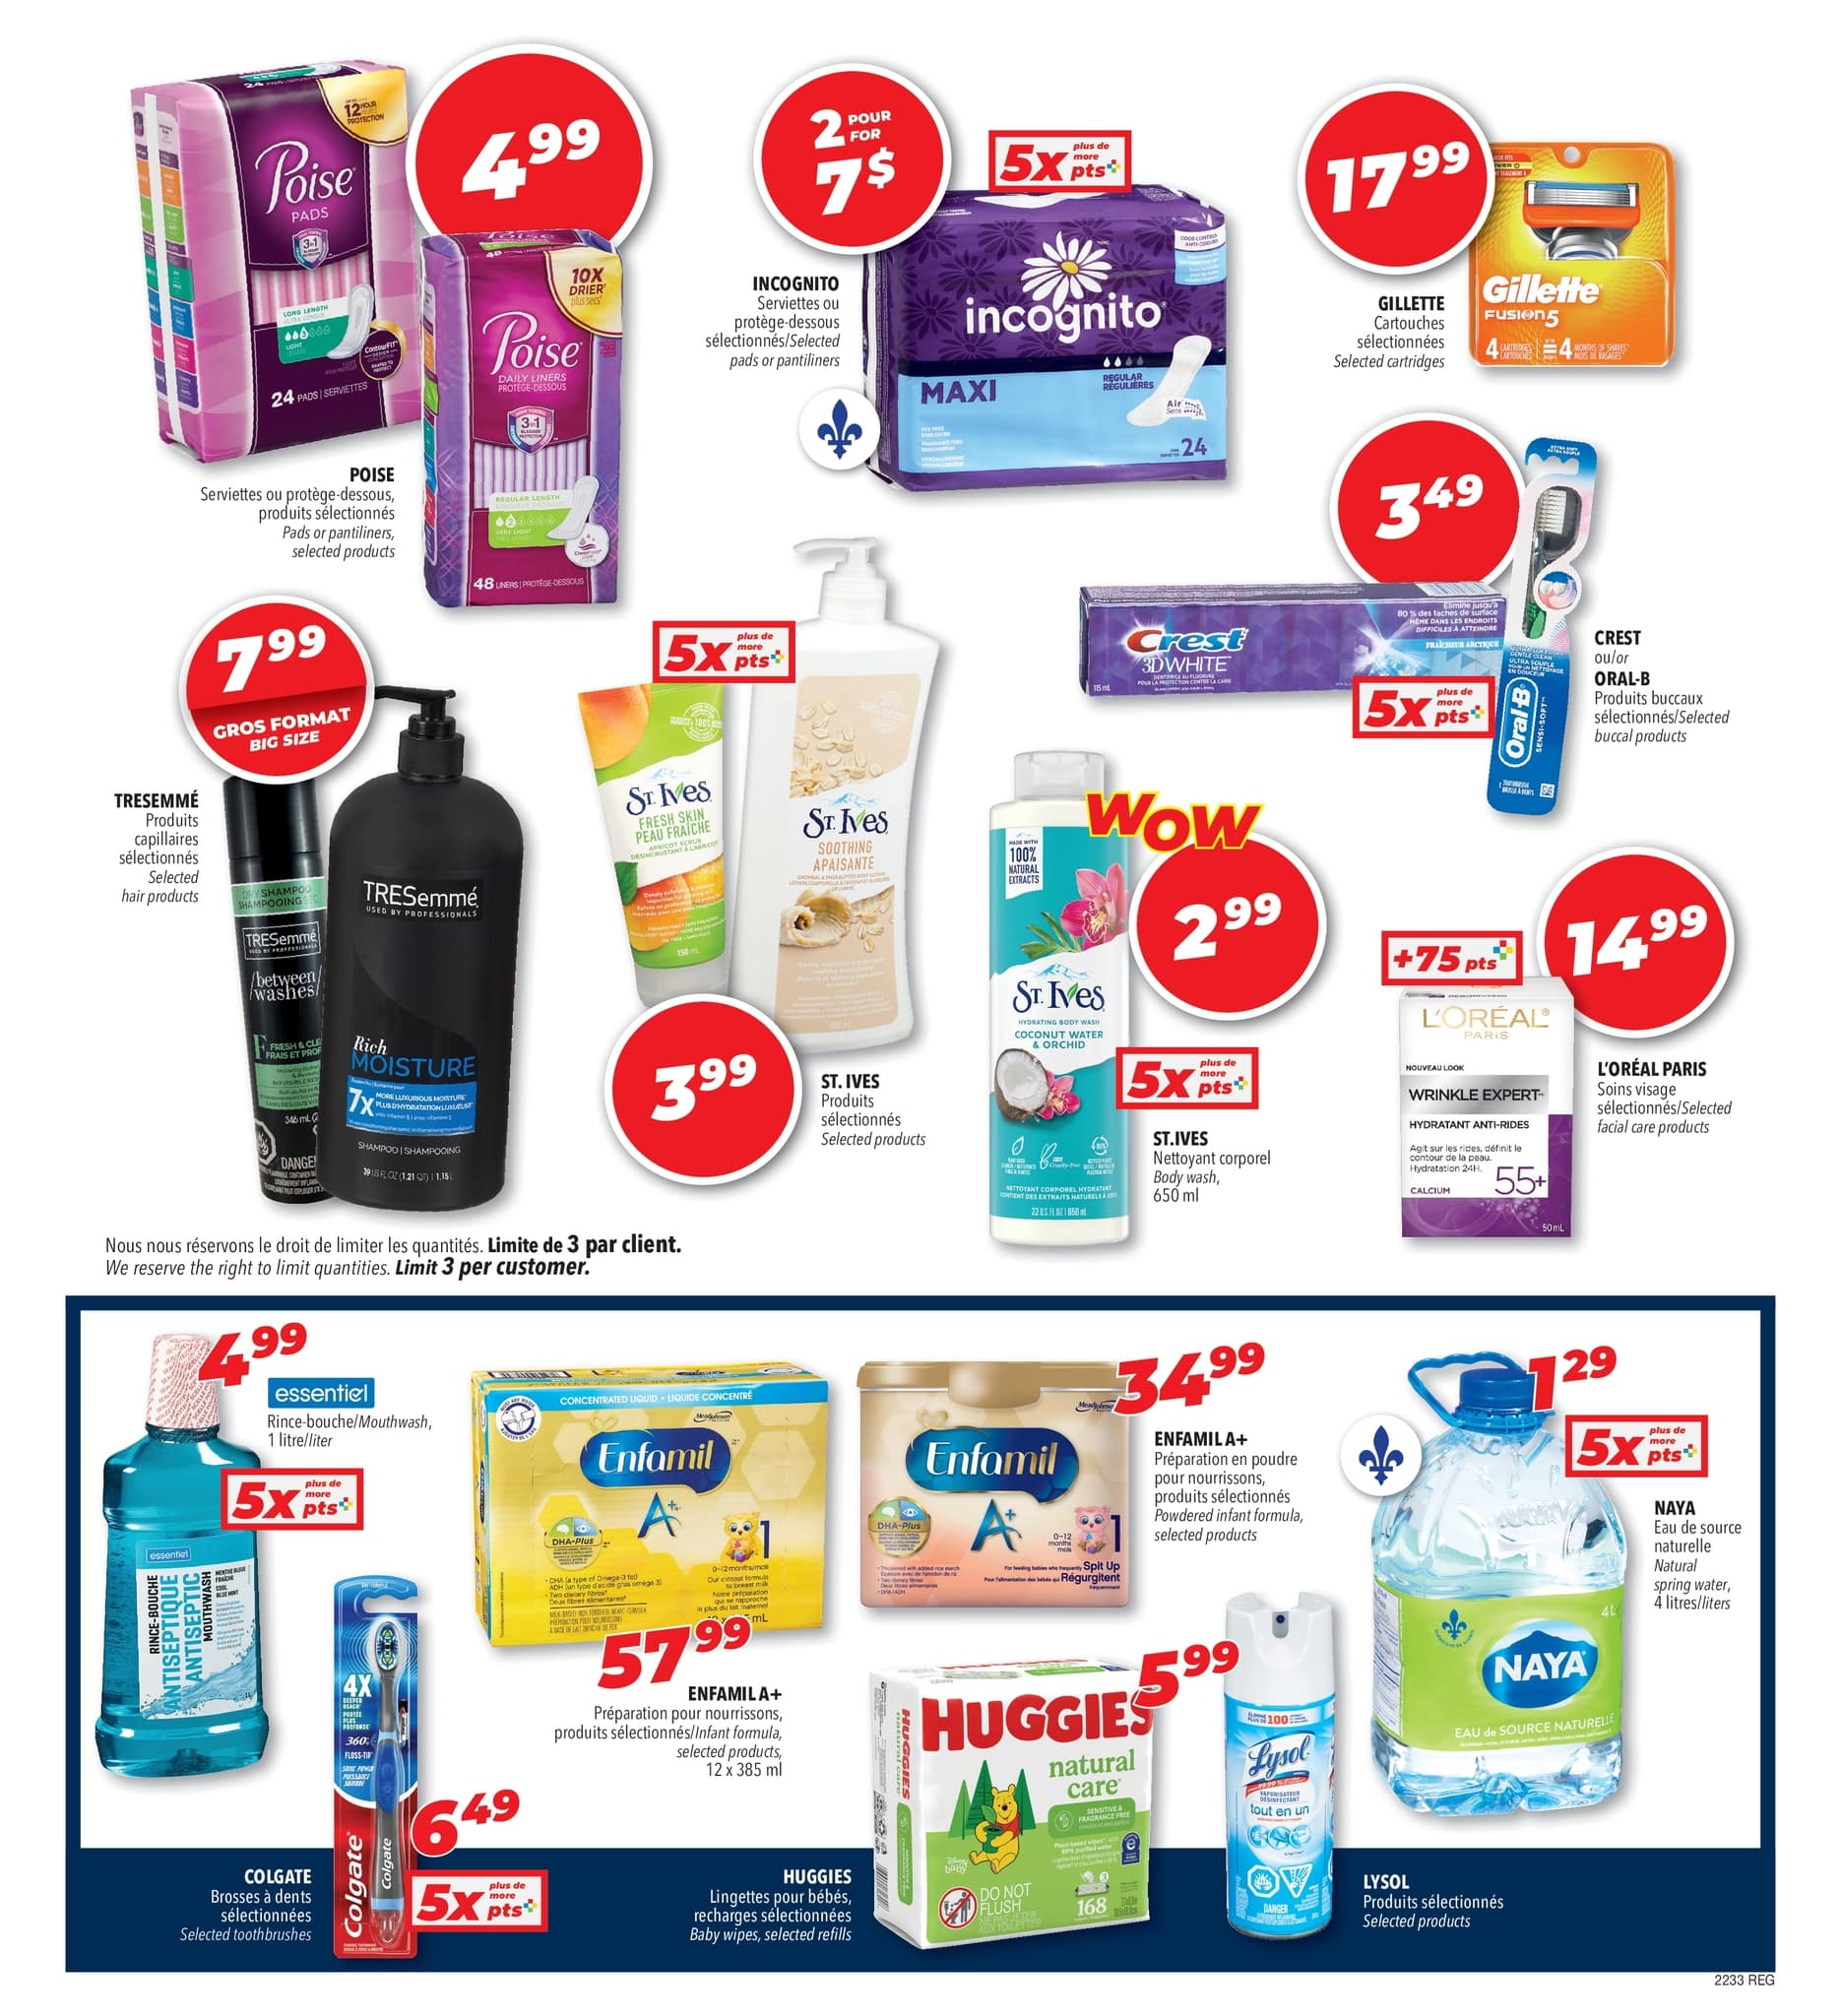 Familiprix - Weekly Flyer Specials - Page 3